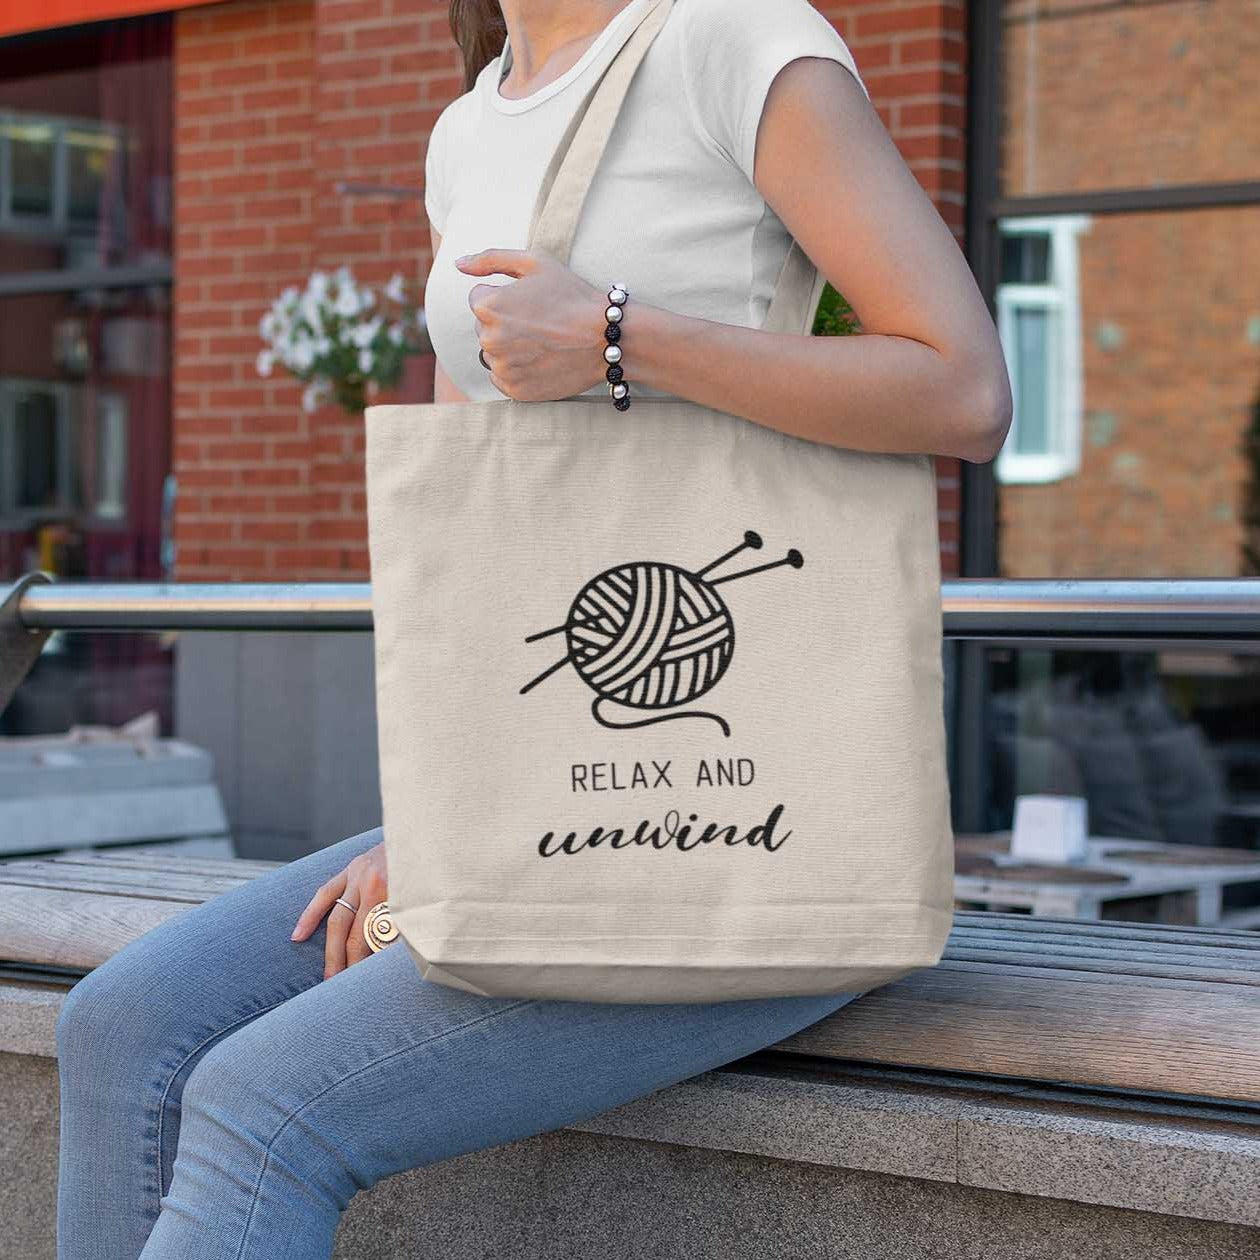 Relax and Unwind - Canvas Tote Bag Tote Bag Environment Reusable